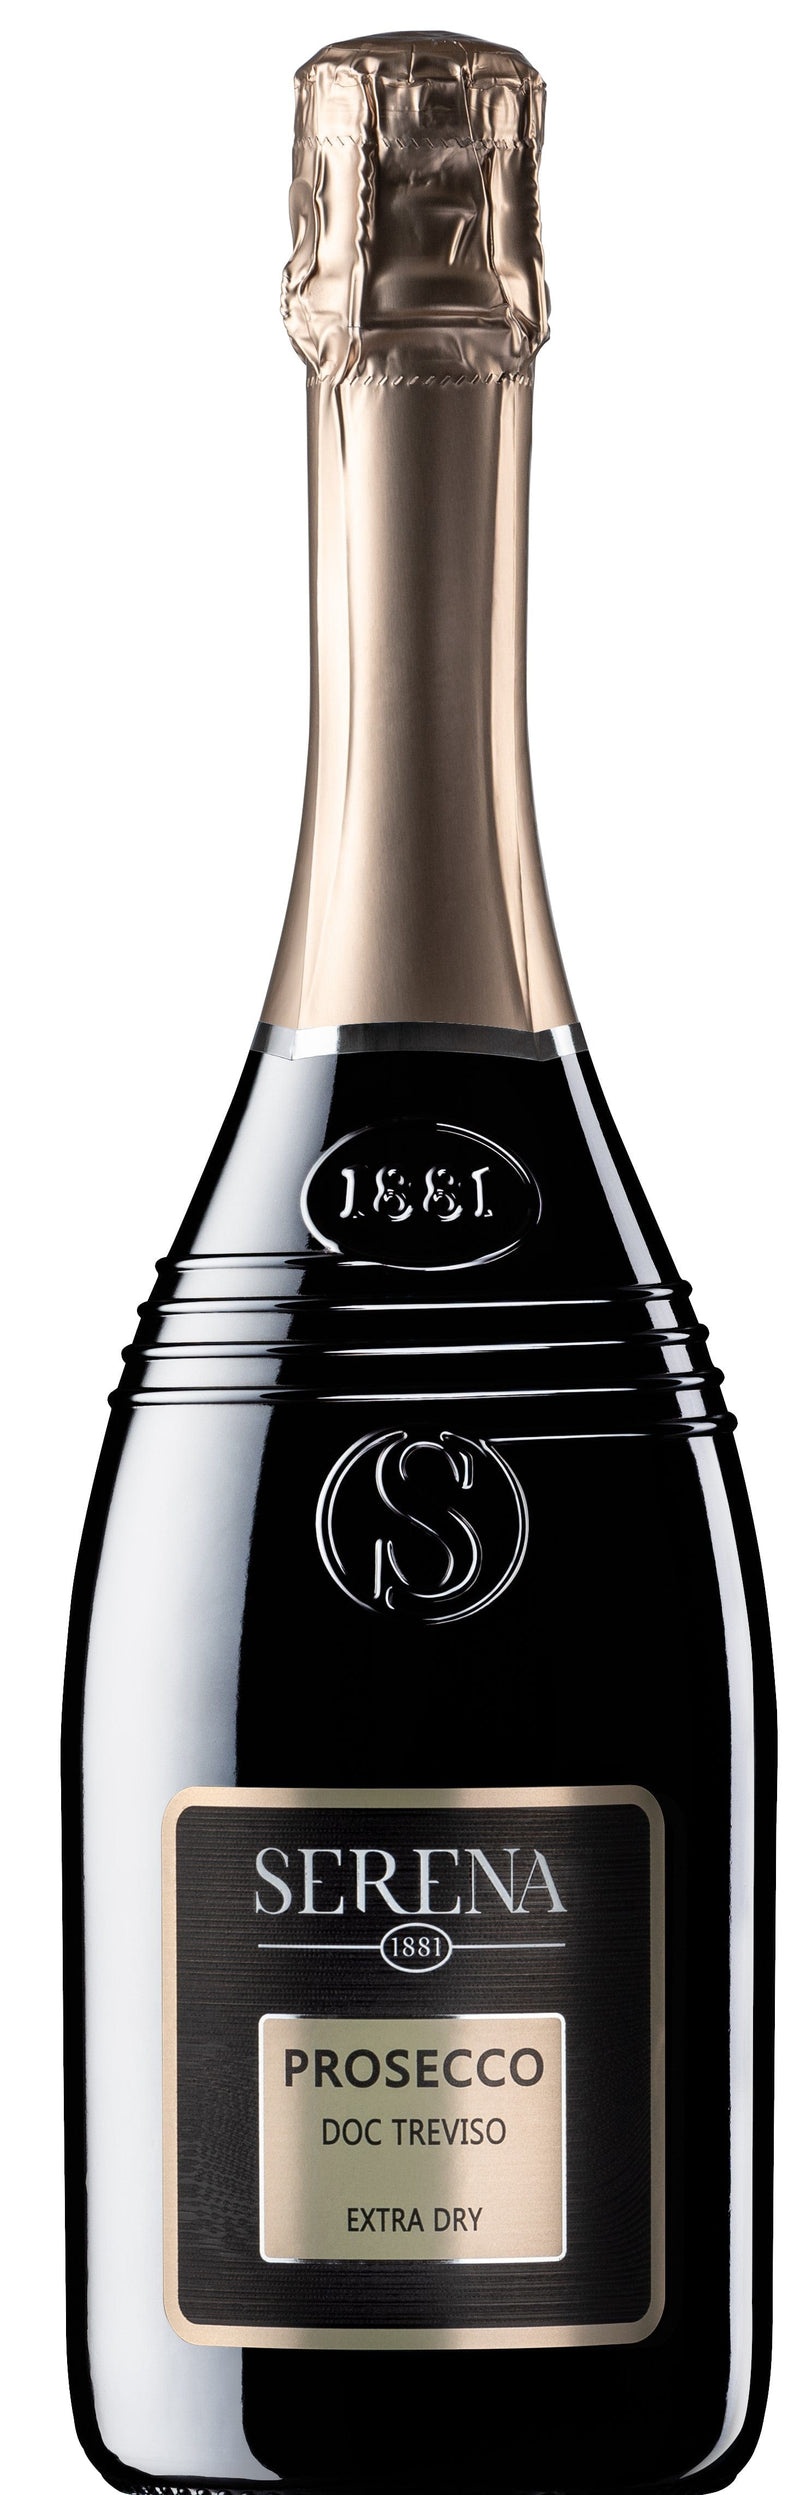 Serena Wines 1881 Prosecco DOC Treviso NV Extra Dry 75cl